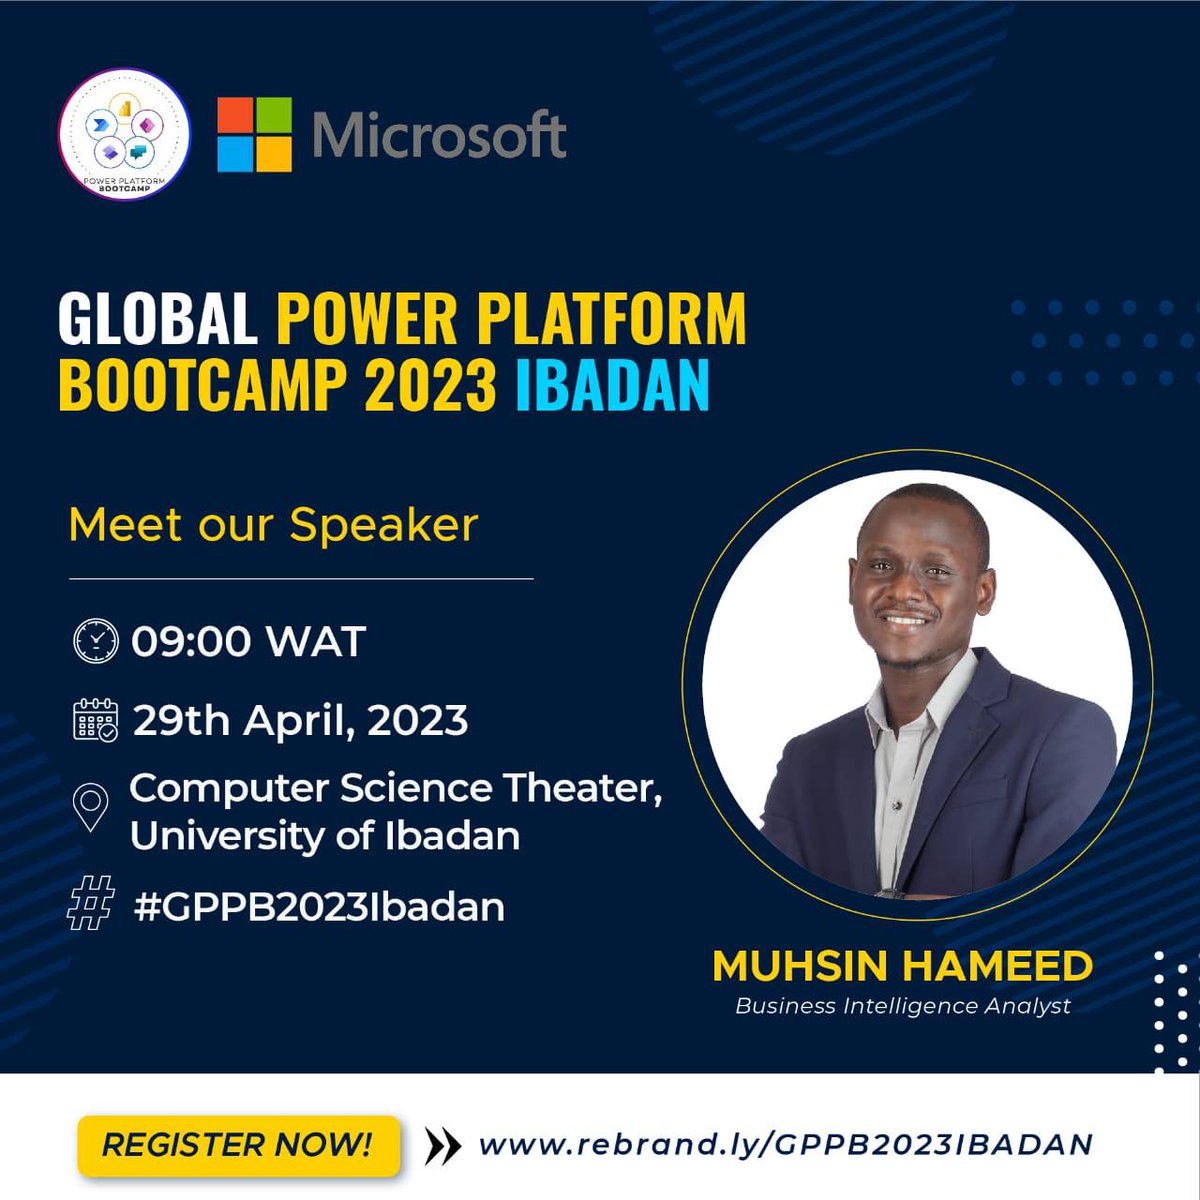 Our Microsoft Power Platform Bootcamp is shaping up to be a can't-miss event, and we're thrilled to have @Id_Analyst on board @GPPBootcamp #GPPB2023 #GPPBIBADAN2023 Register here: rebrand.ly/GPPB2023IBADAN